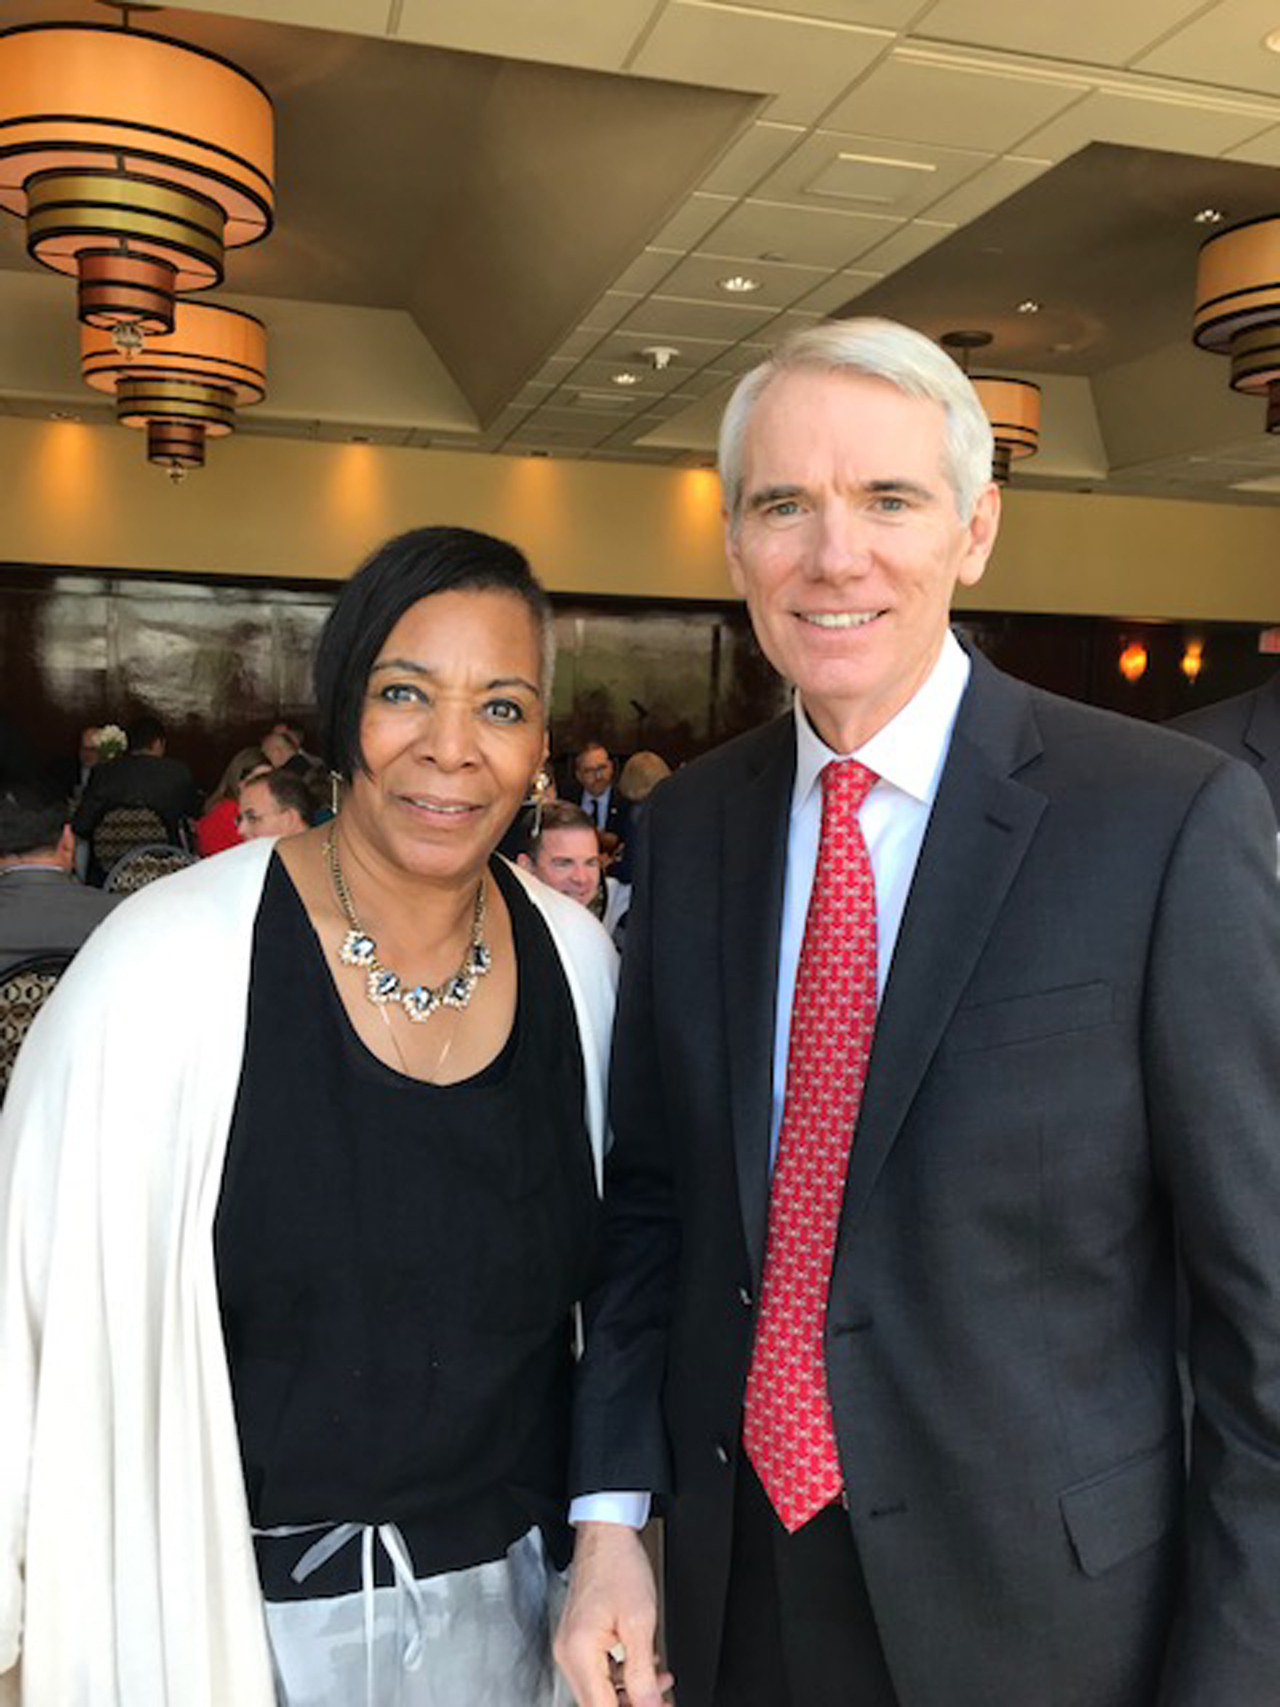 Rep. Ingram meets with Senator Rob Portman to discuss the upsides and downsides of Ohio's development from a federal perspective